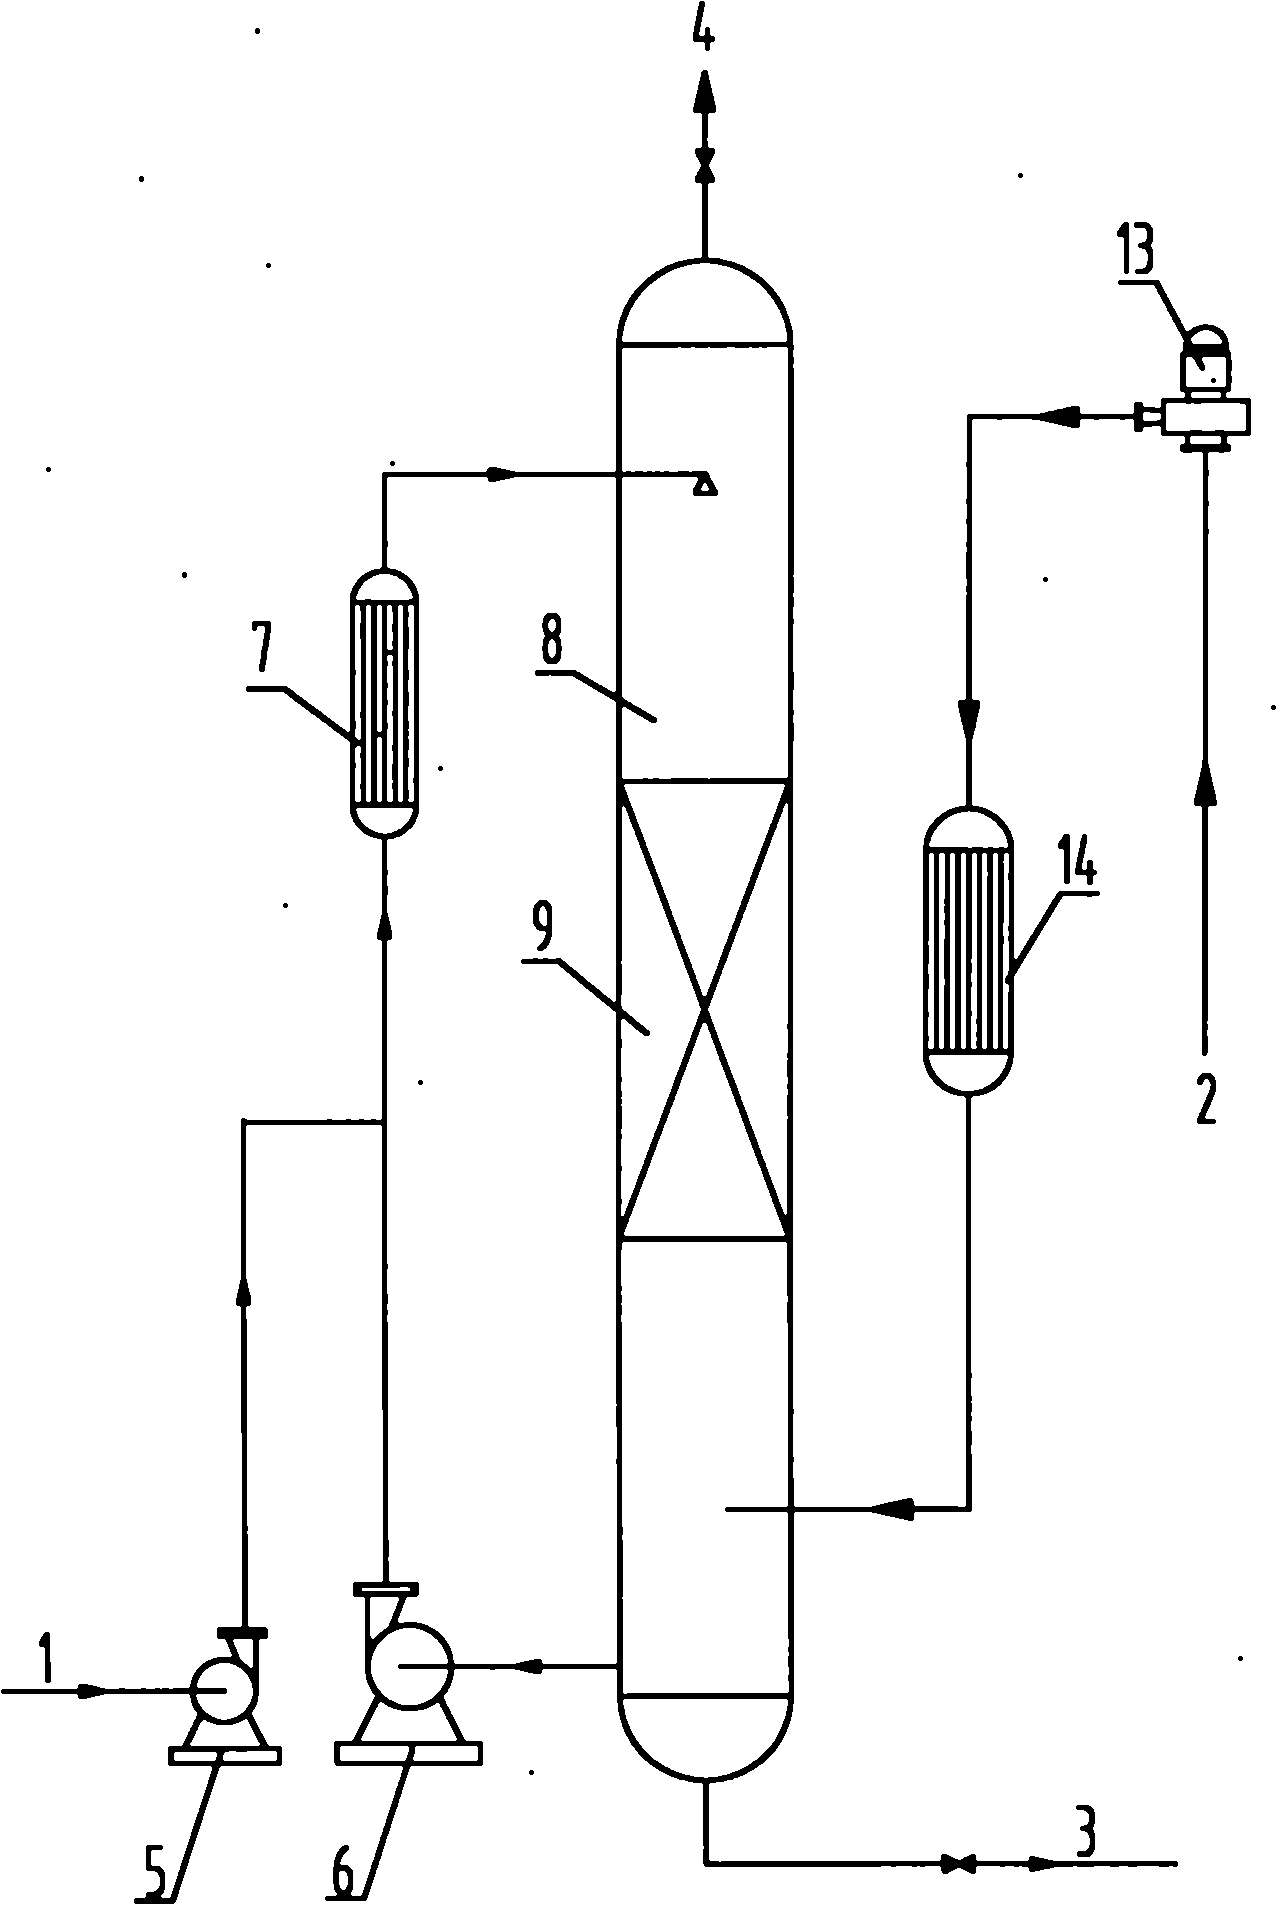 Process for synthesizing benzoquinones by direct oxidation of phenols